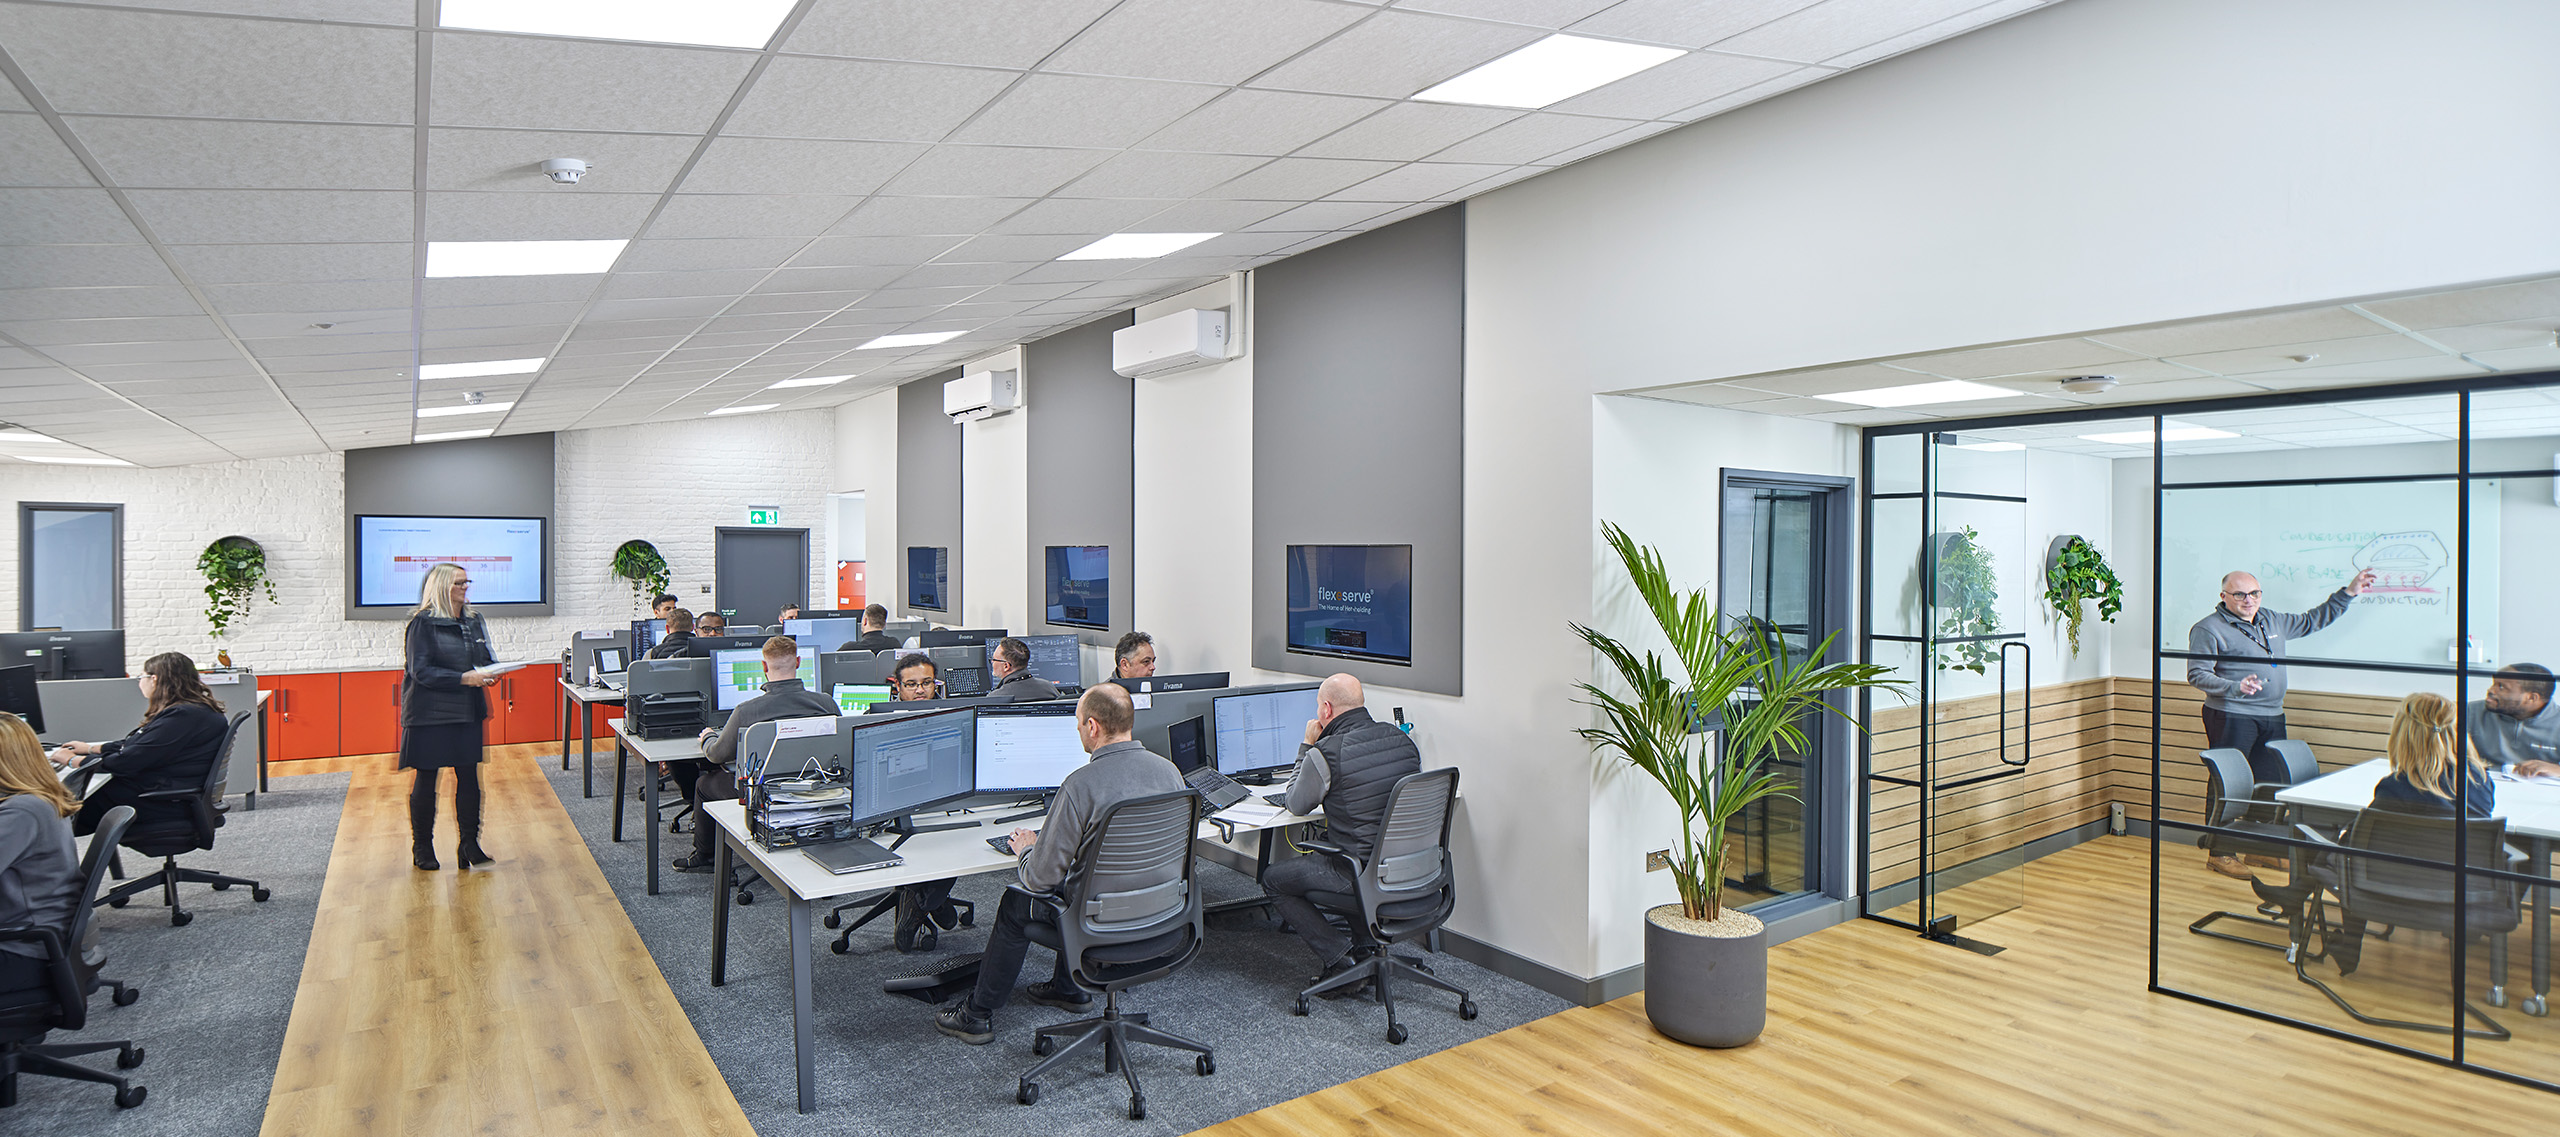 Office Partners at Flexeserve's Global HQ, the Home of Hot-holding